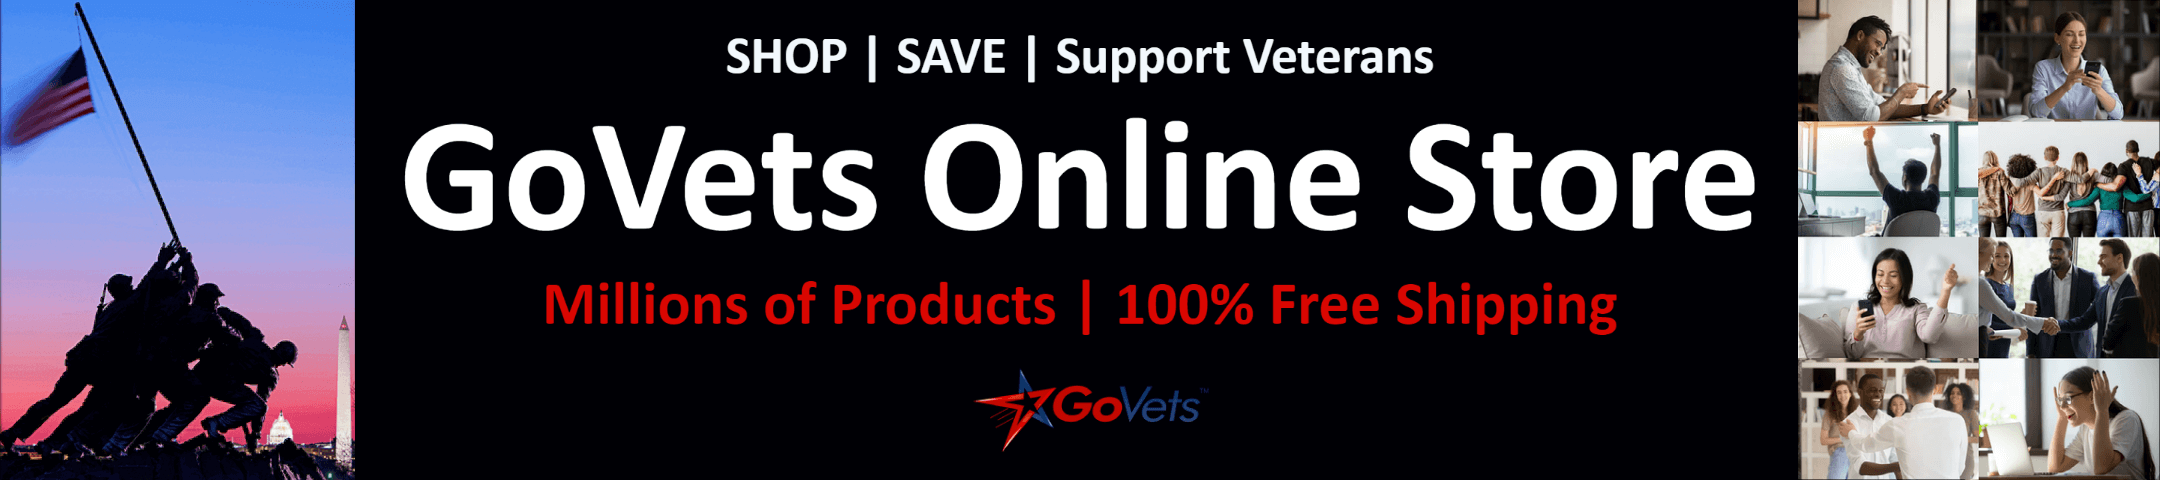 Shop GoVets - 100% Free Shipping across Millions of Products.  Check out our Promotions